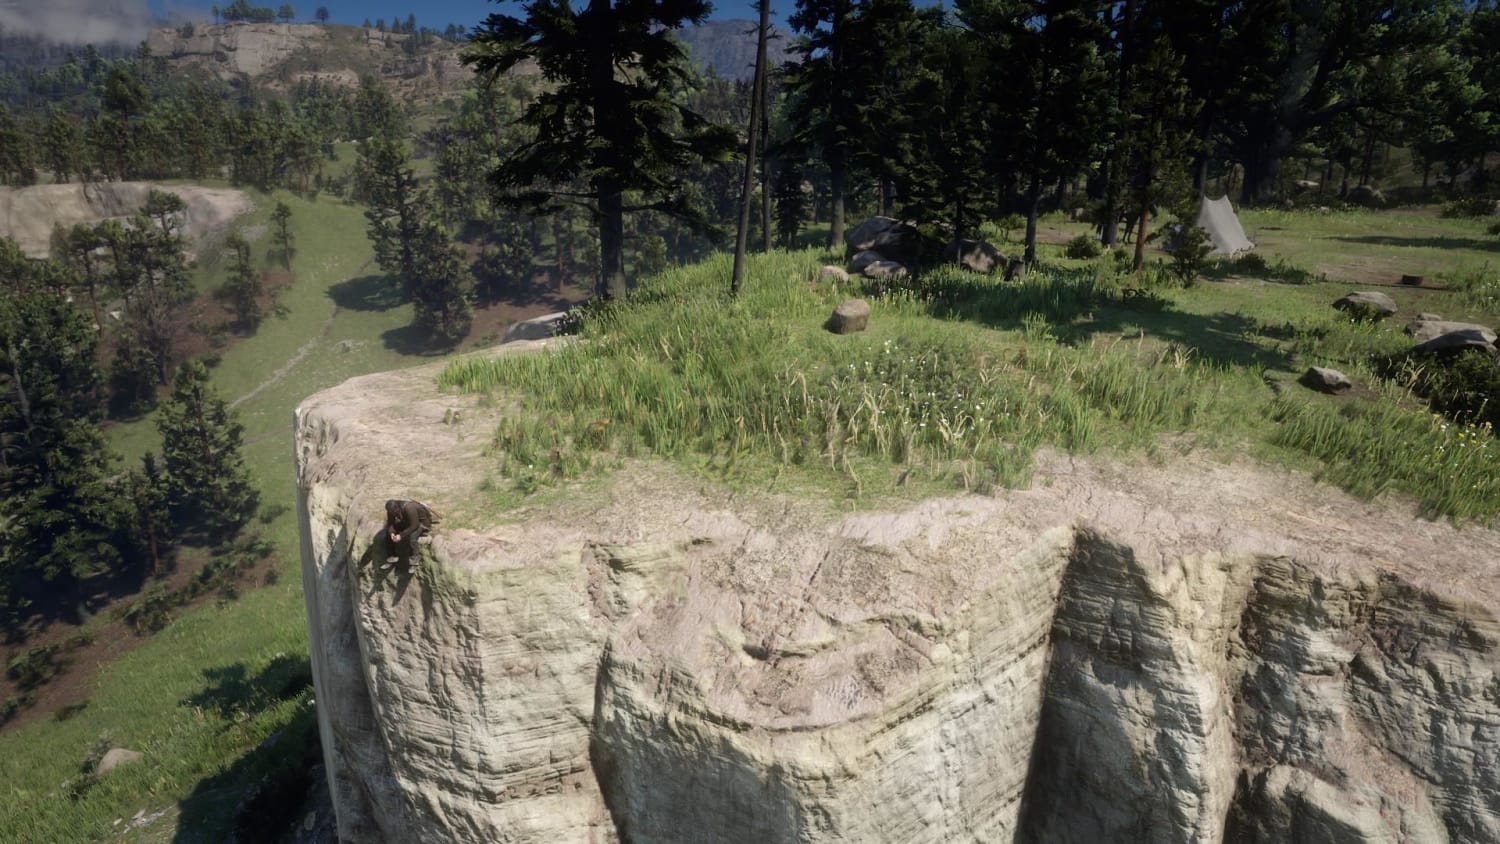 Went back to Horseshoe Overlook and made a camp there